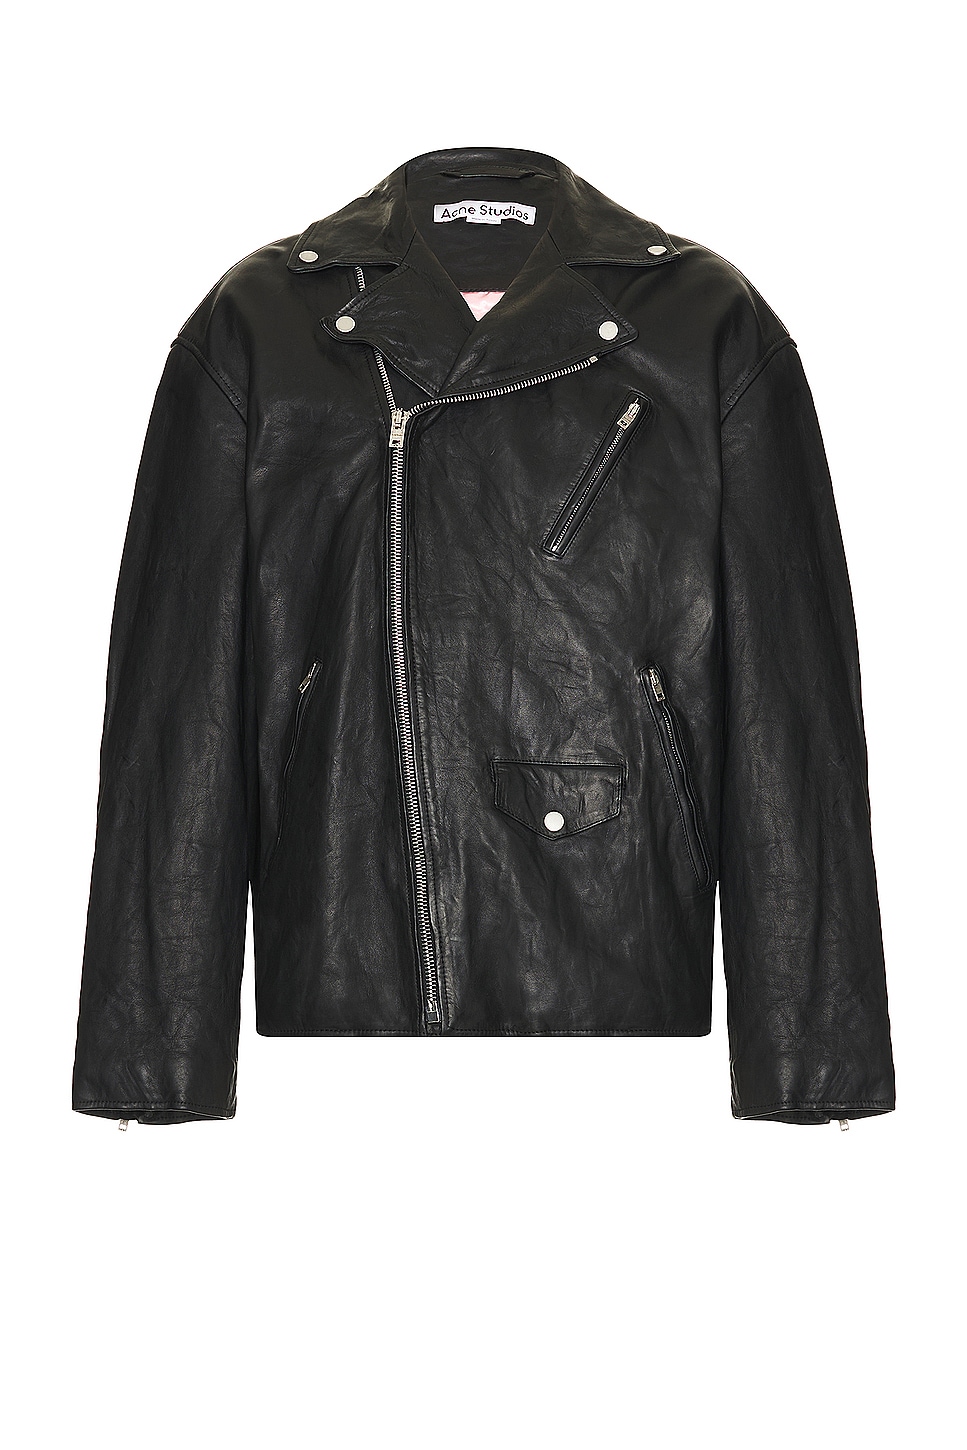 Image 1 of Acne Studios Leather Jacket in Black